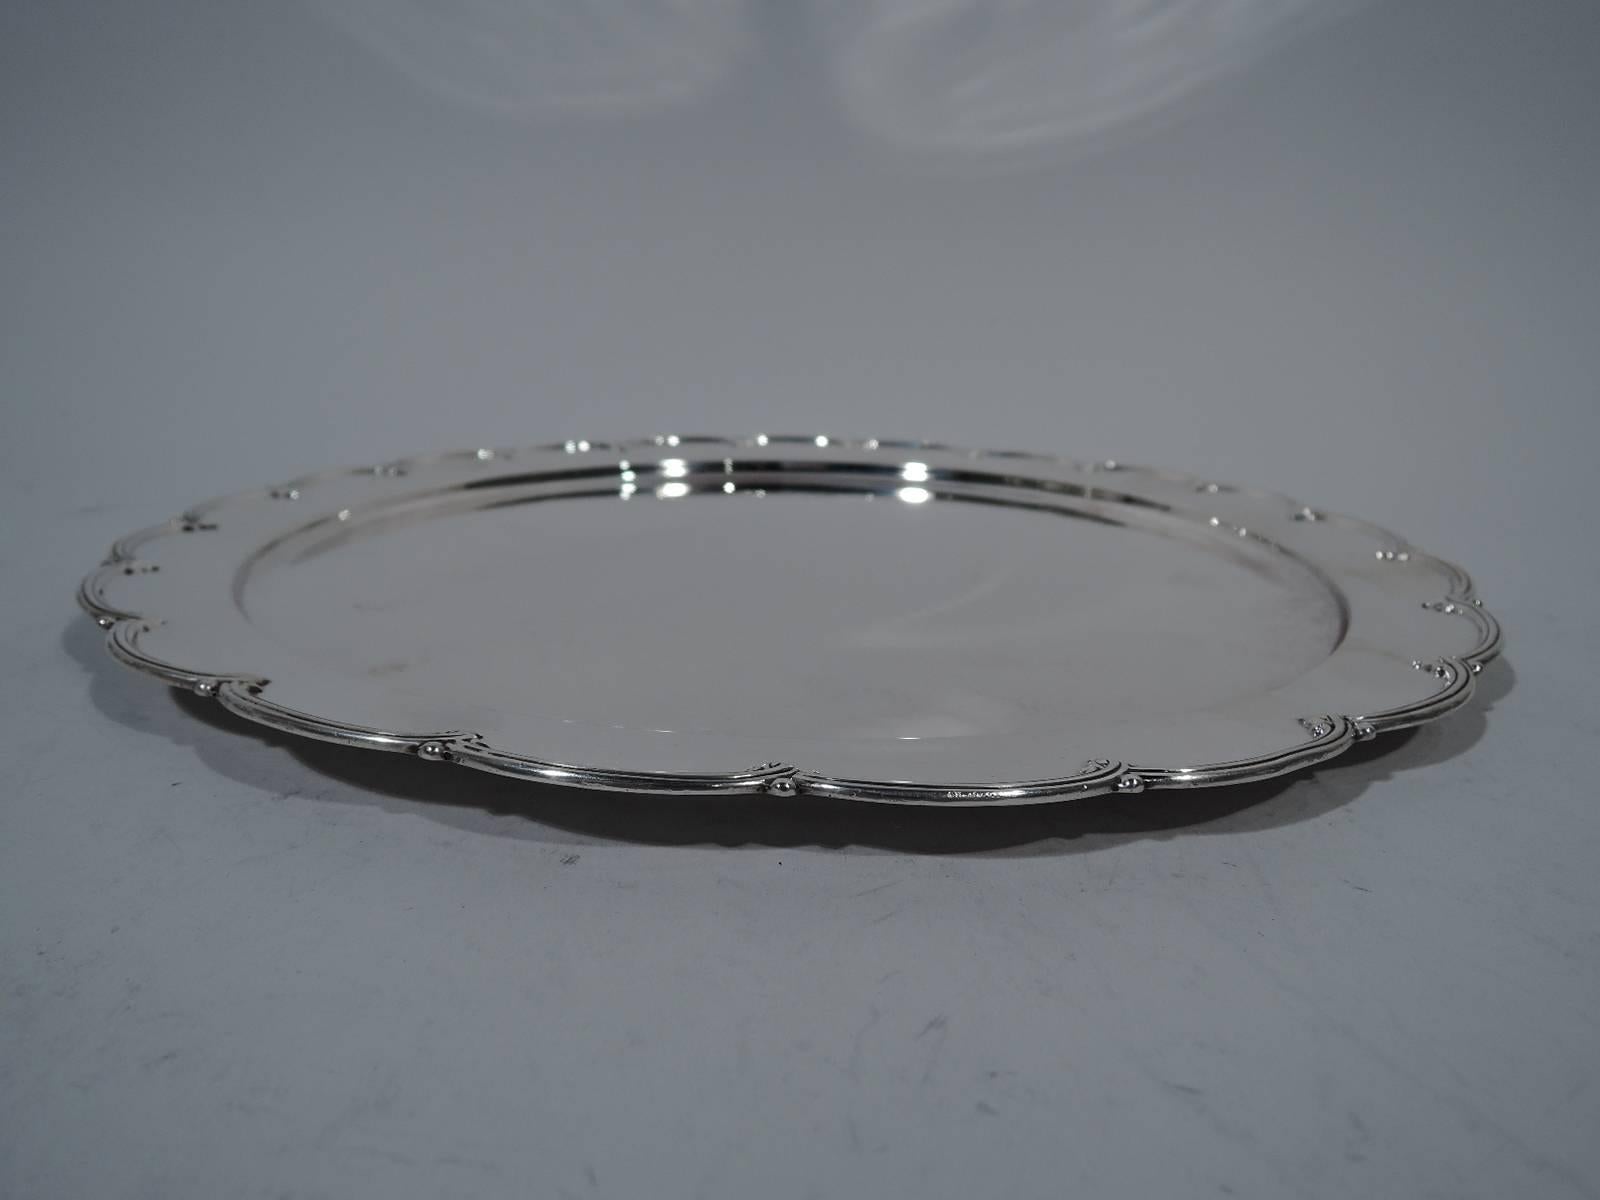 Edwardian sterling silver serving tray. Made by Tiffany & Co. in New York. Circular with well. Petal-scalloped rim with applied reeding. Hallmark includes pattern no. 13562 and director’s letter C (1902-1907). Weight: 19.5 troy ounces.